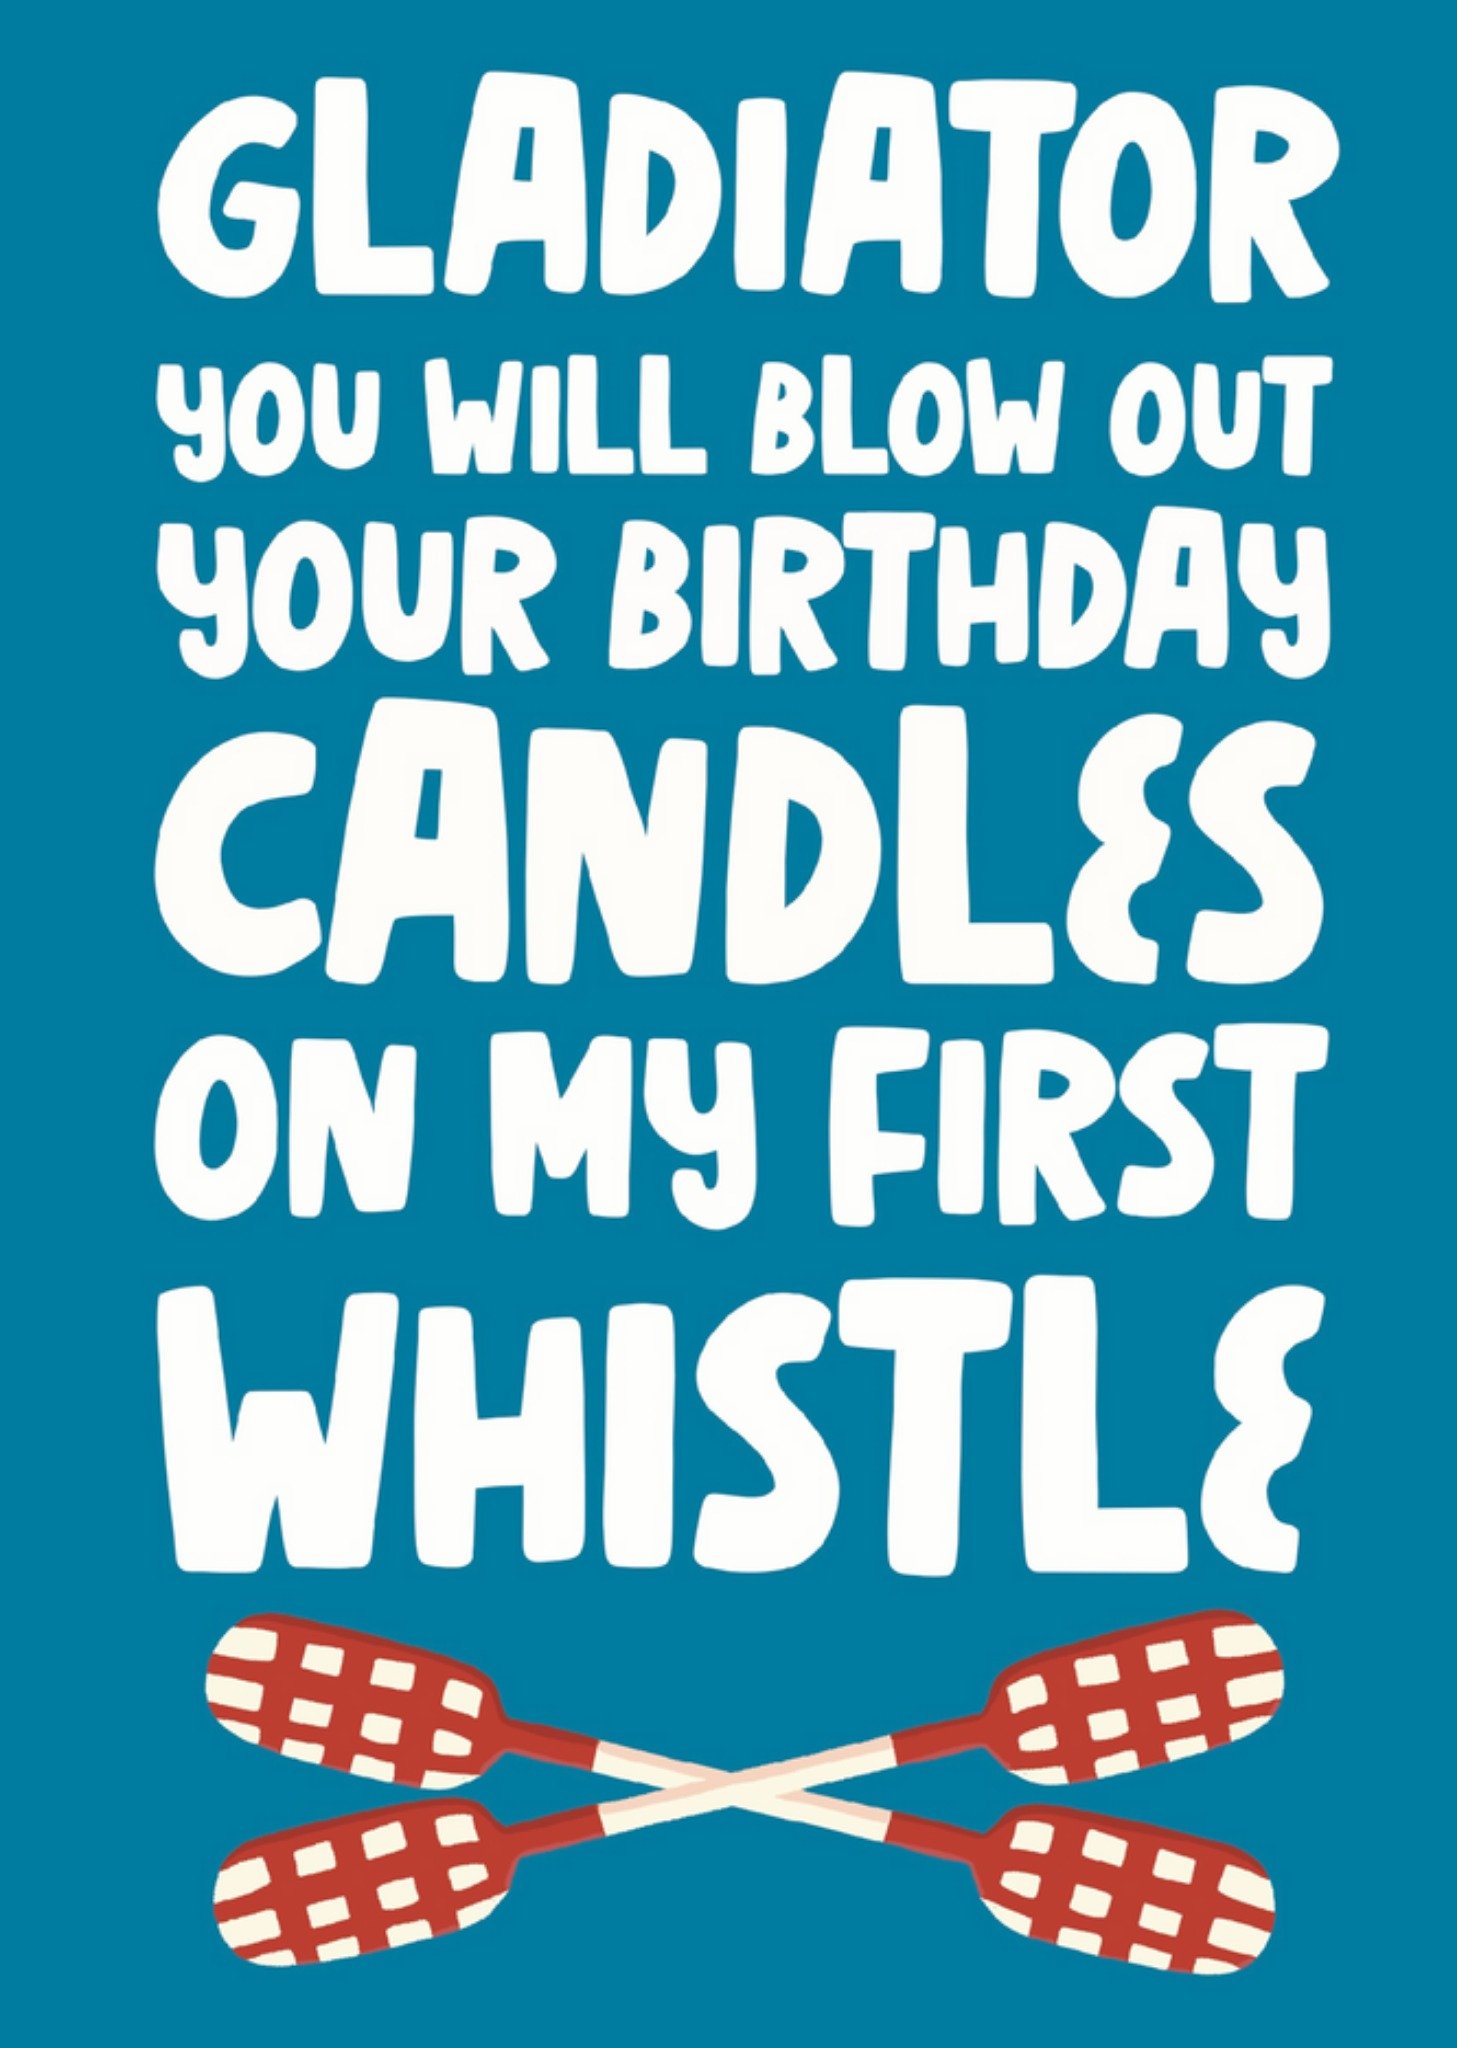 Moonpig Gladiator You Will Blow Out Your Birthday Candles On My First Whistle Card Ecard